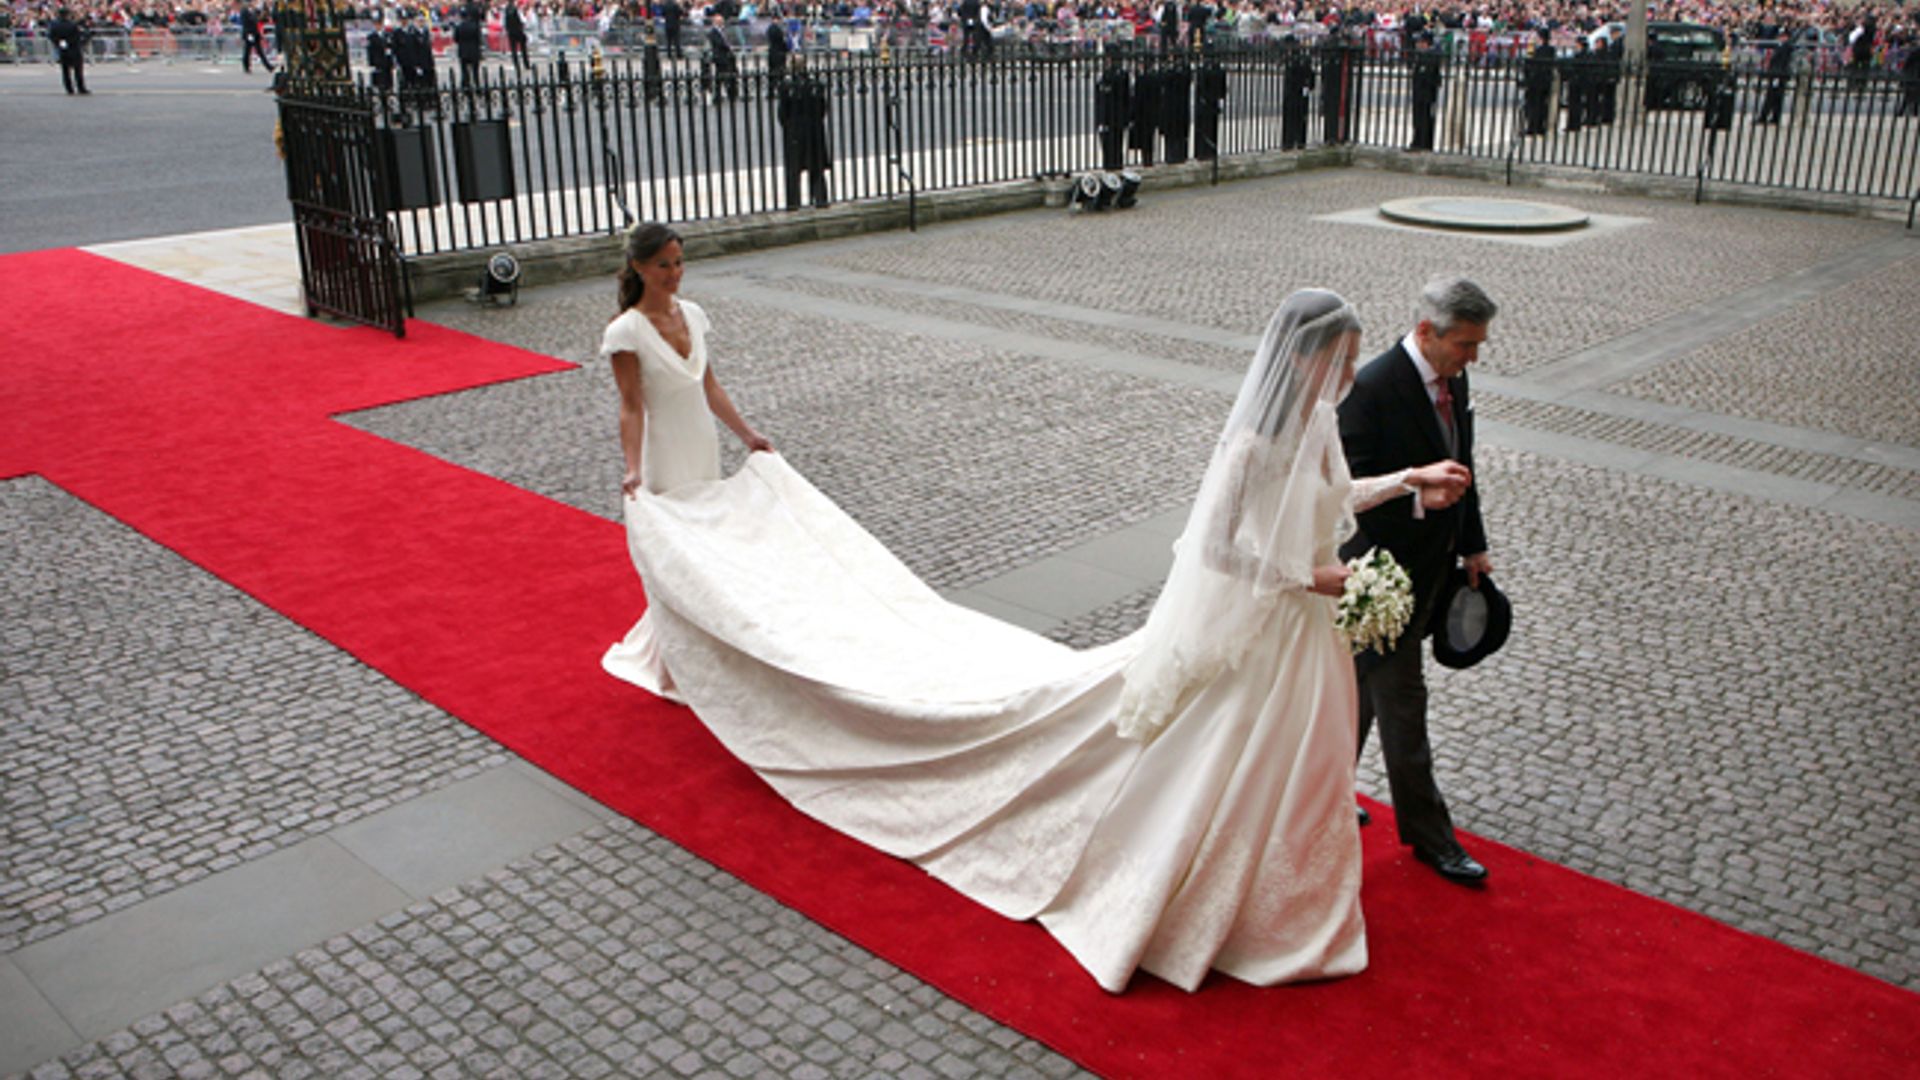 Pippa Middleton holding her sister Princess Kate's bridal train ahead of her wedding